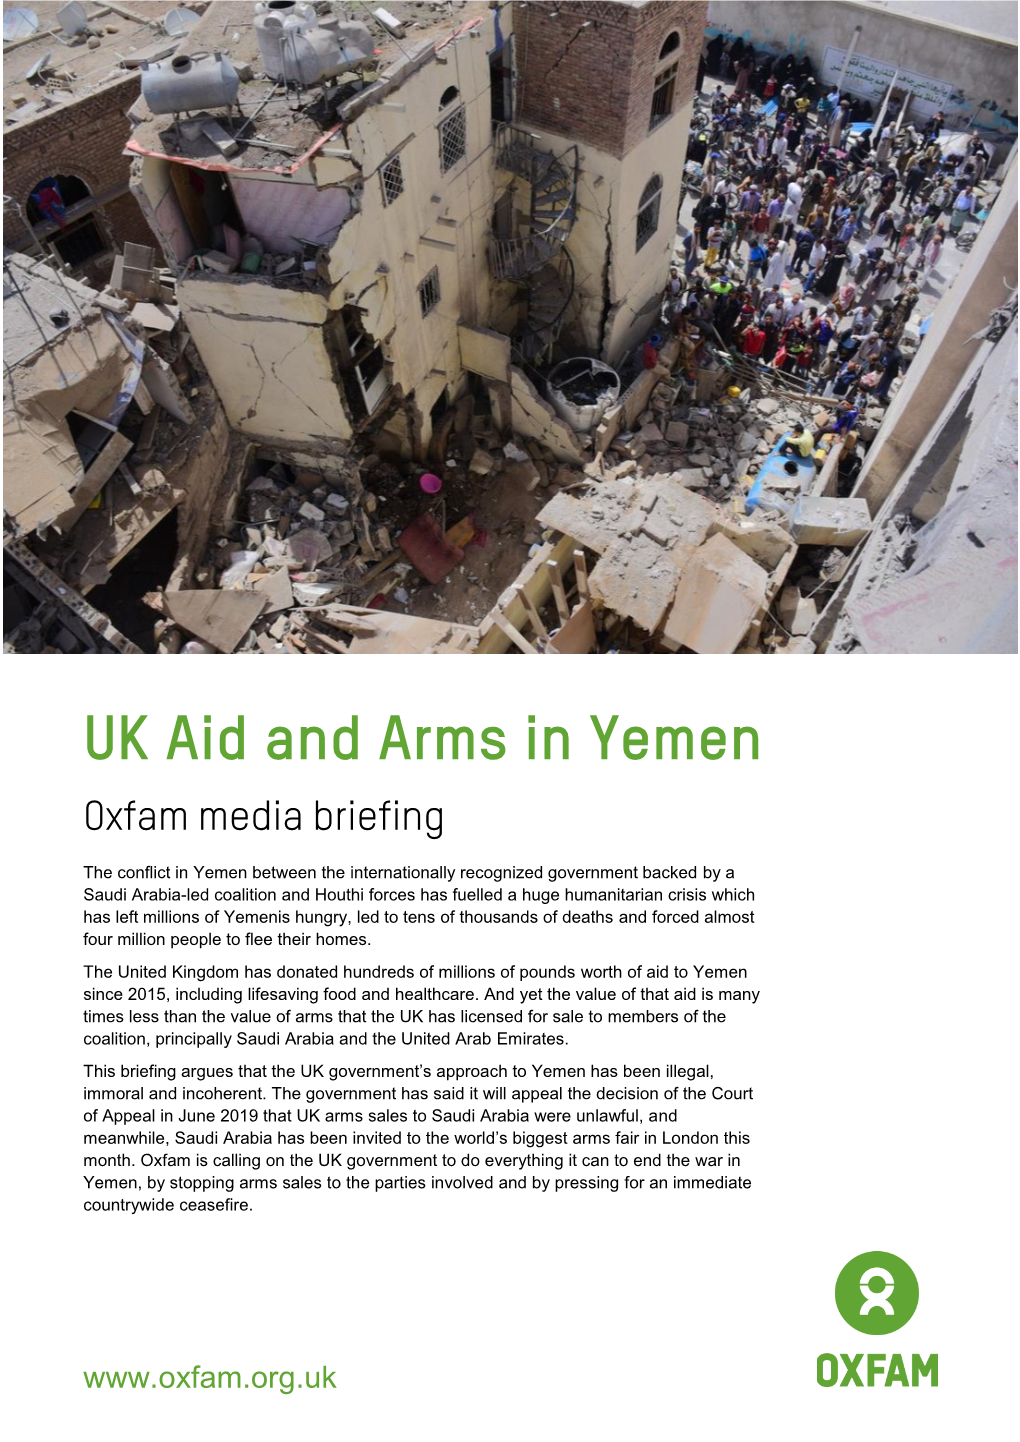 UK Aid and Arms in Yemen Oxfam Media Briefing